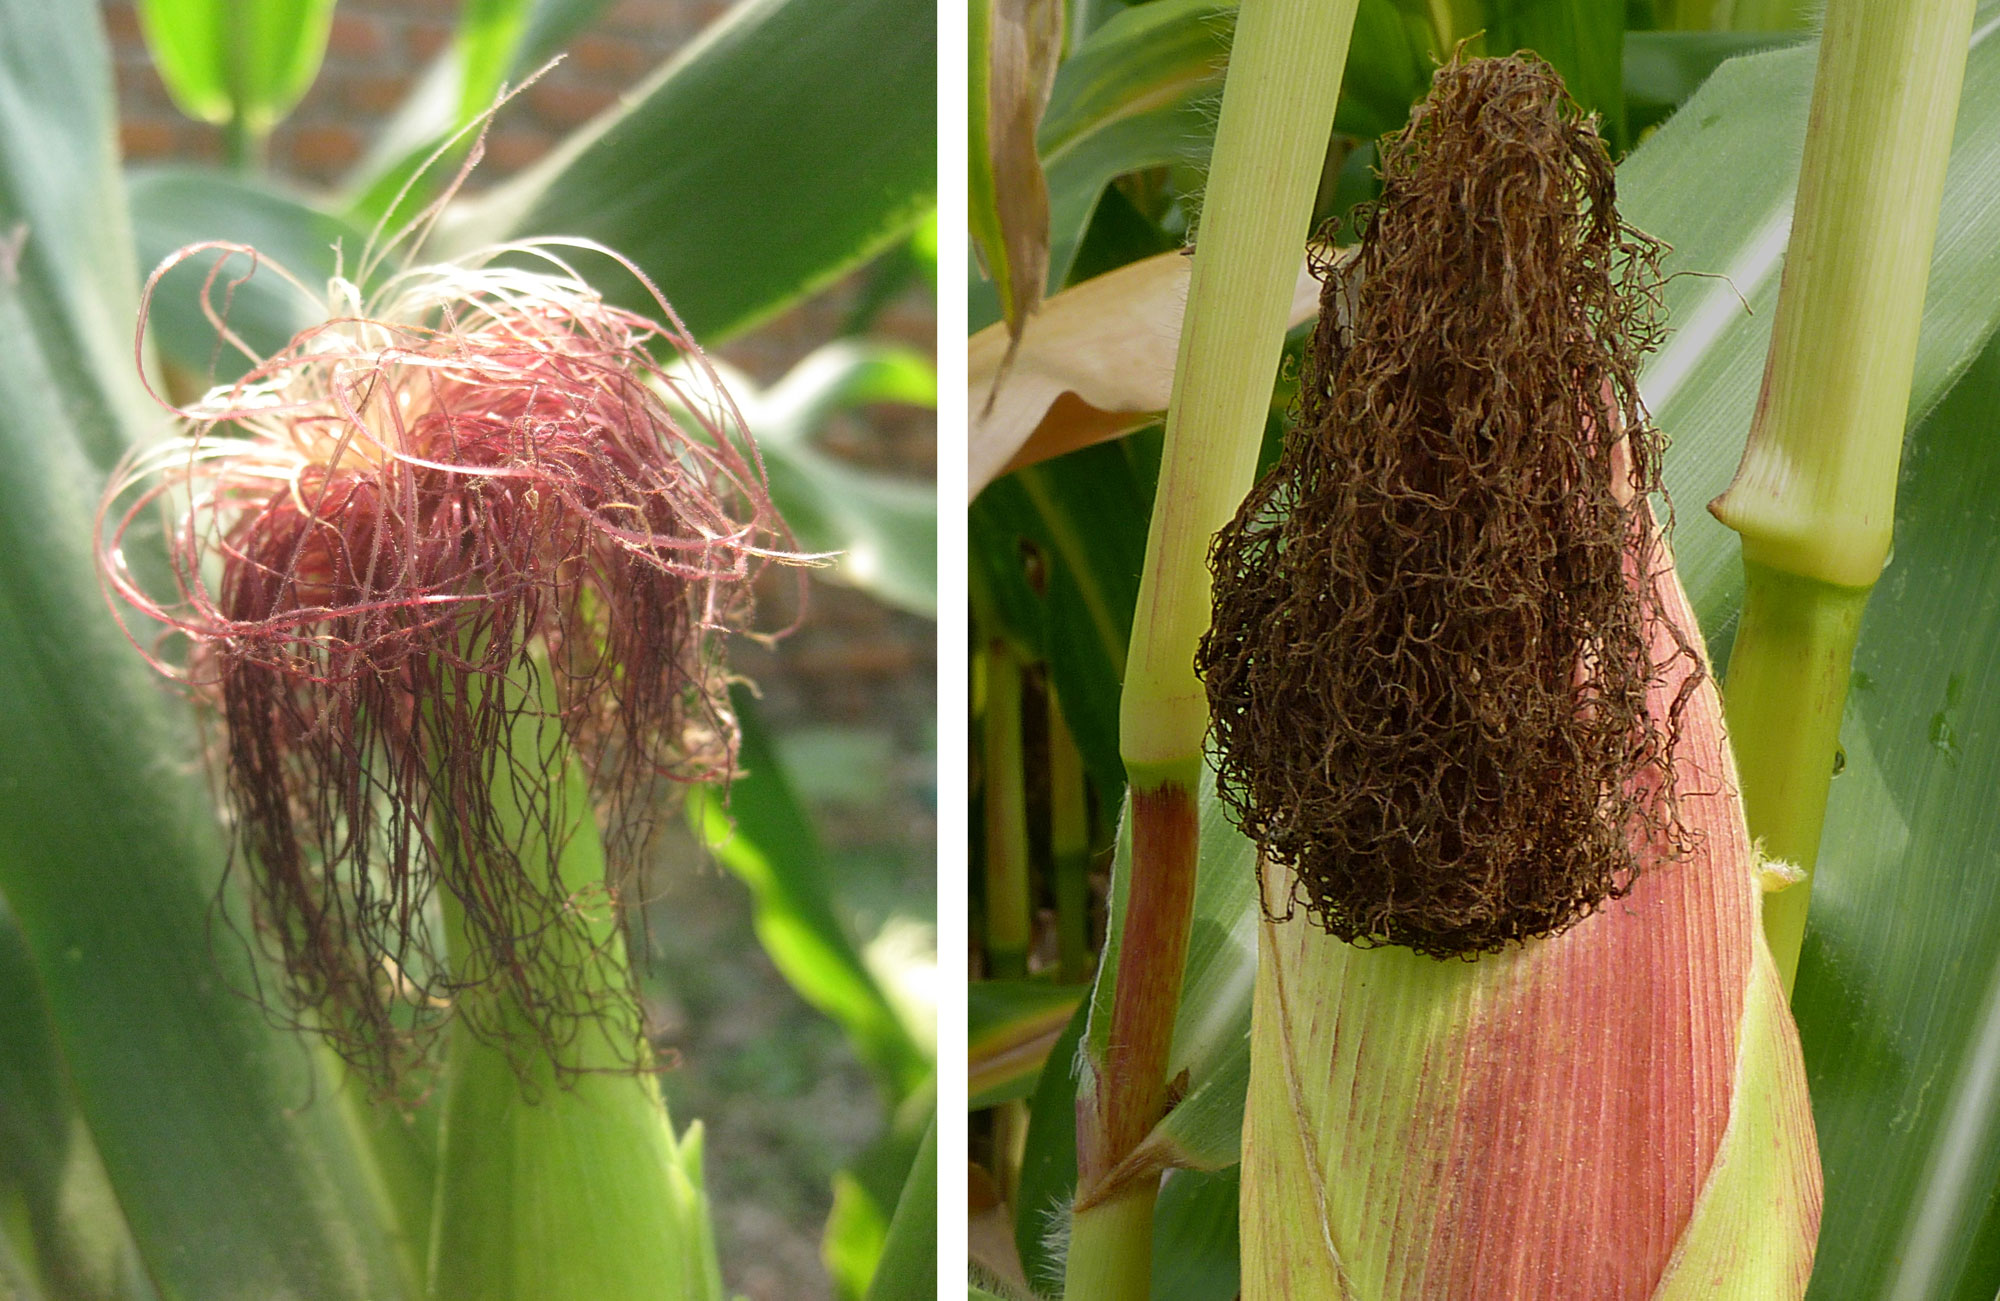 2-panel image showing photographs of maize silks. Panel 1: Photograph of the tip of an ear of maize with silks. About half of the silks are withered. Panel 2. Photograph of the tip of an ear of maize with silks. All of the silks are withered and brown.